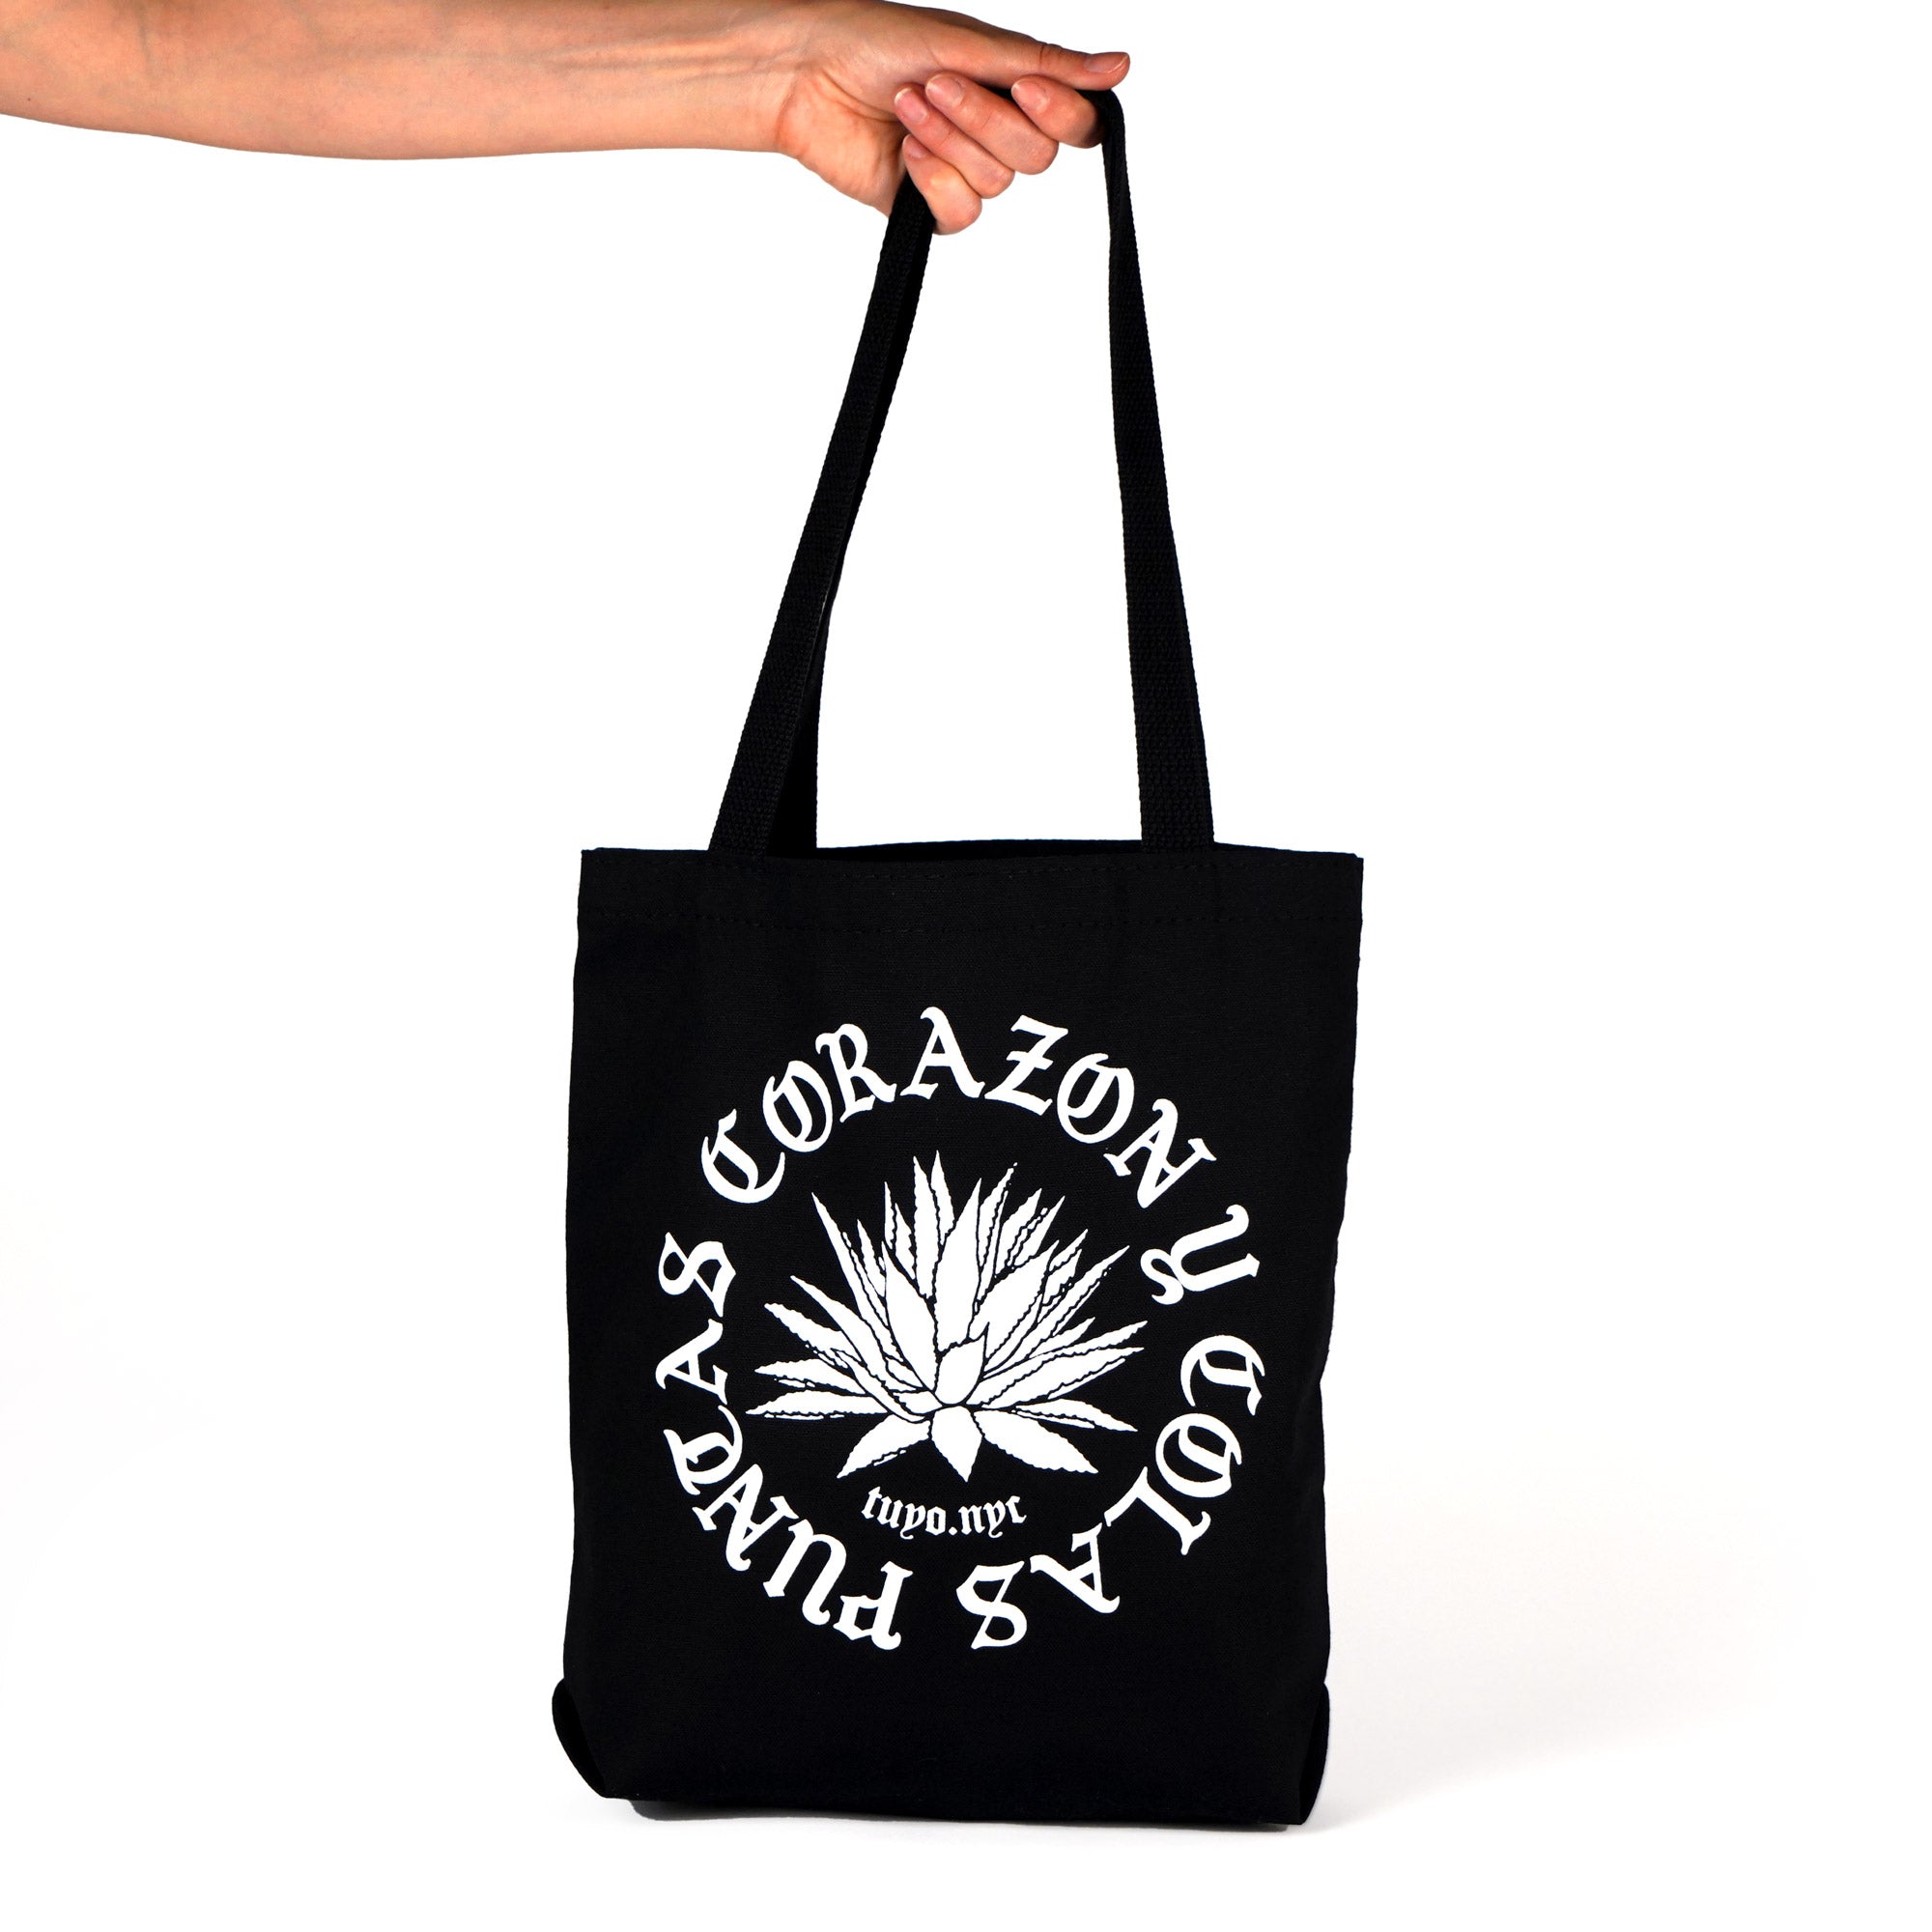 Agave Canvas Tote Bag